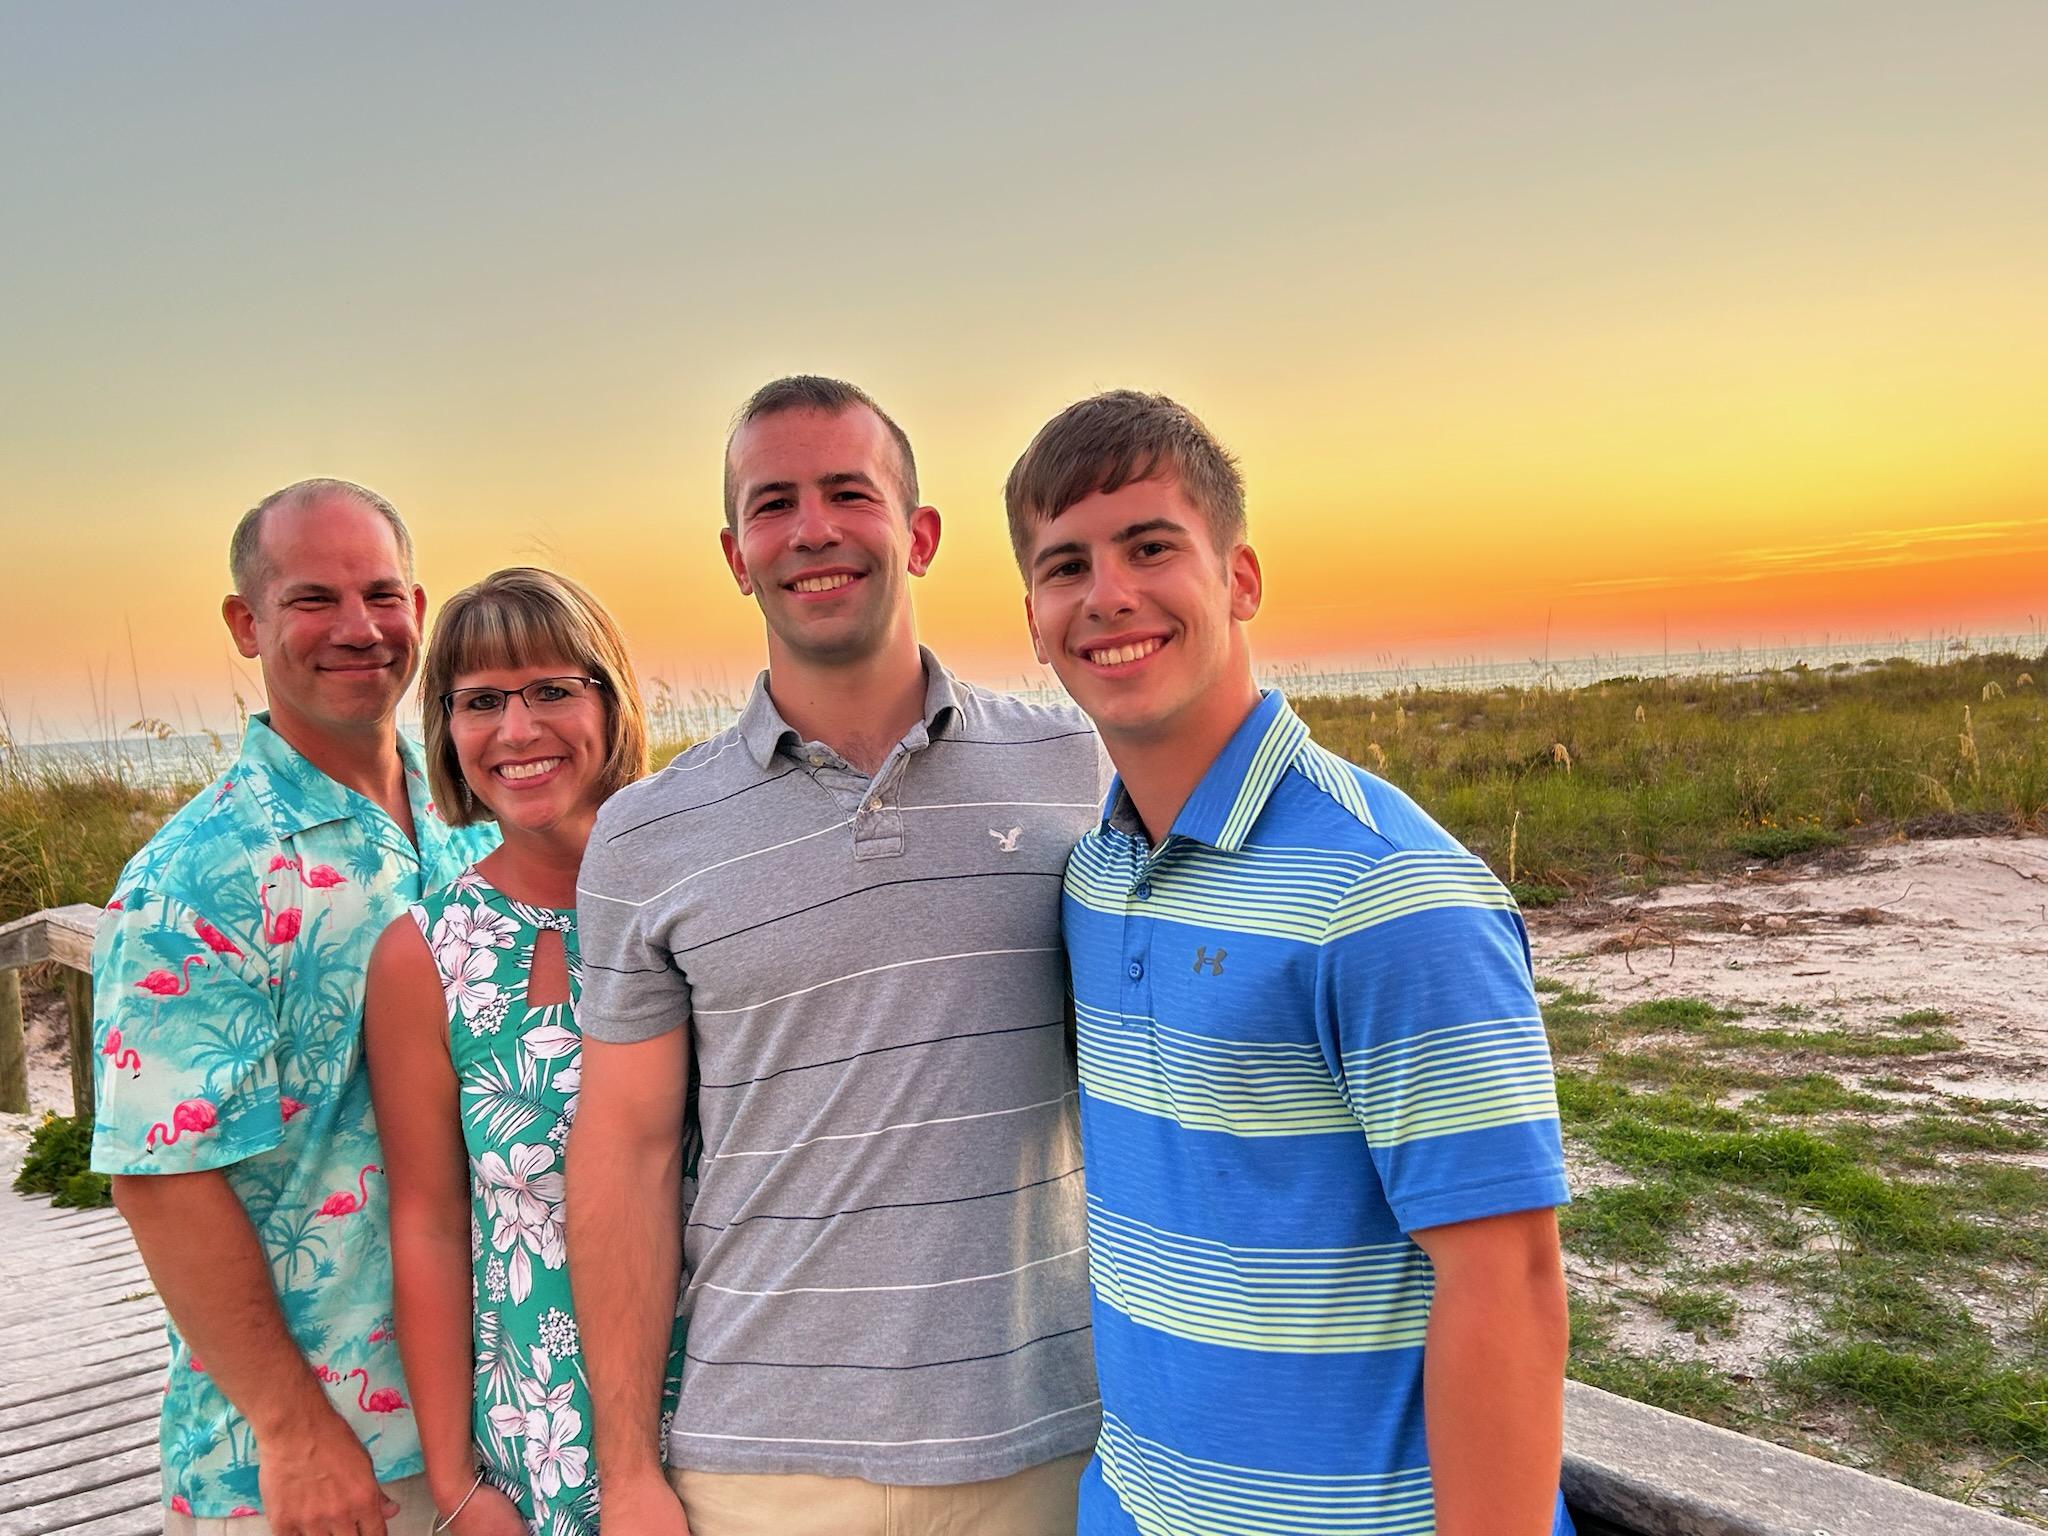 Kelli and her family in St Pete Beach, FL